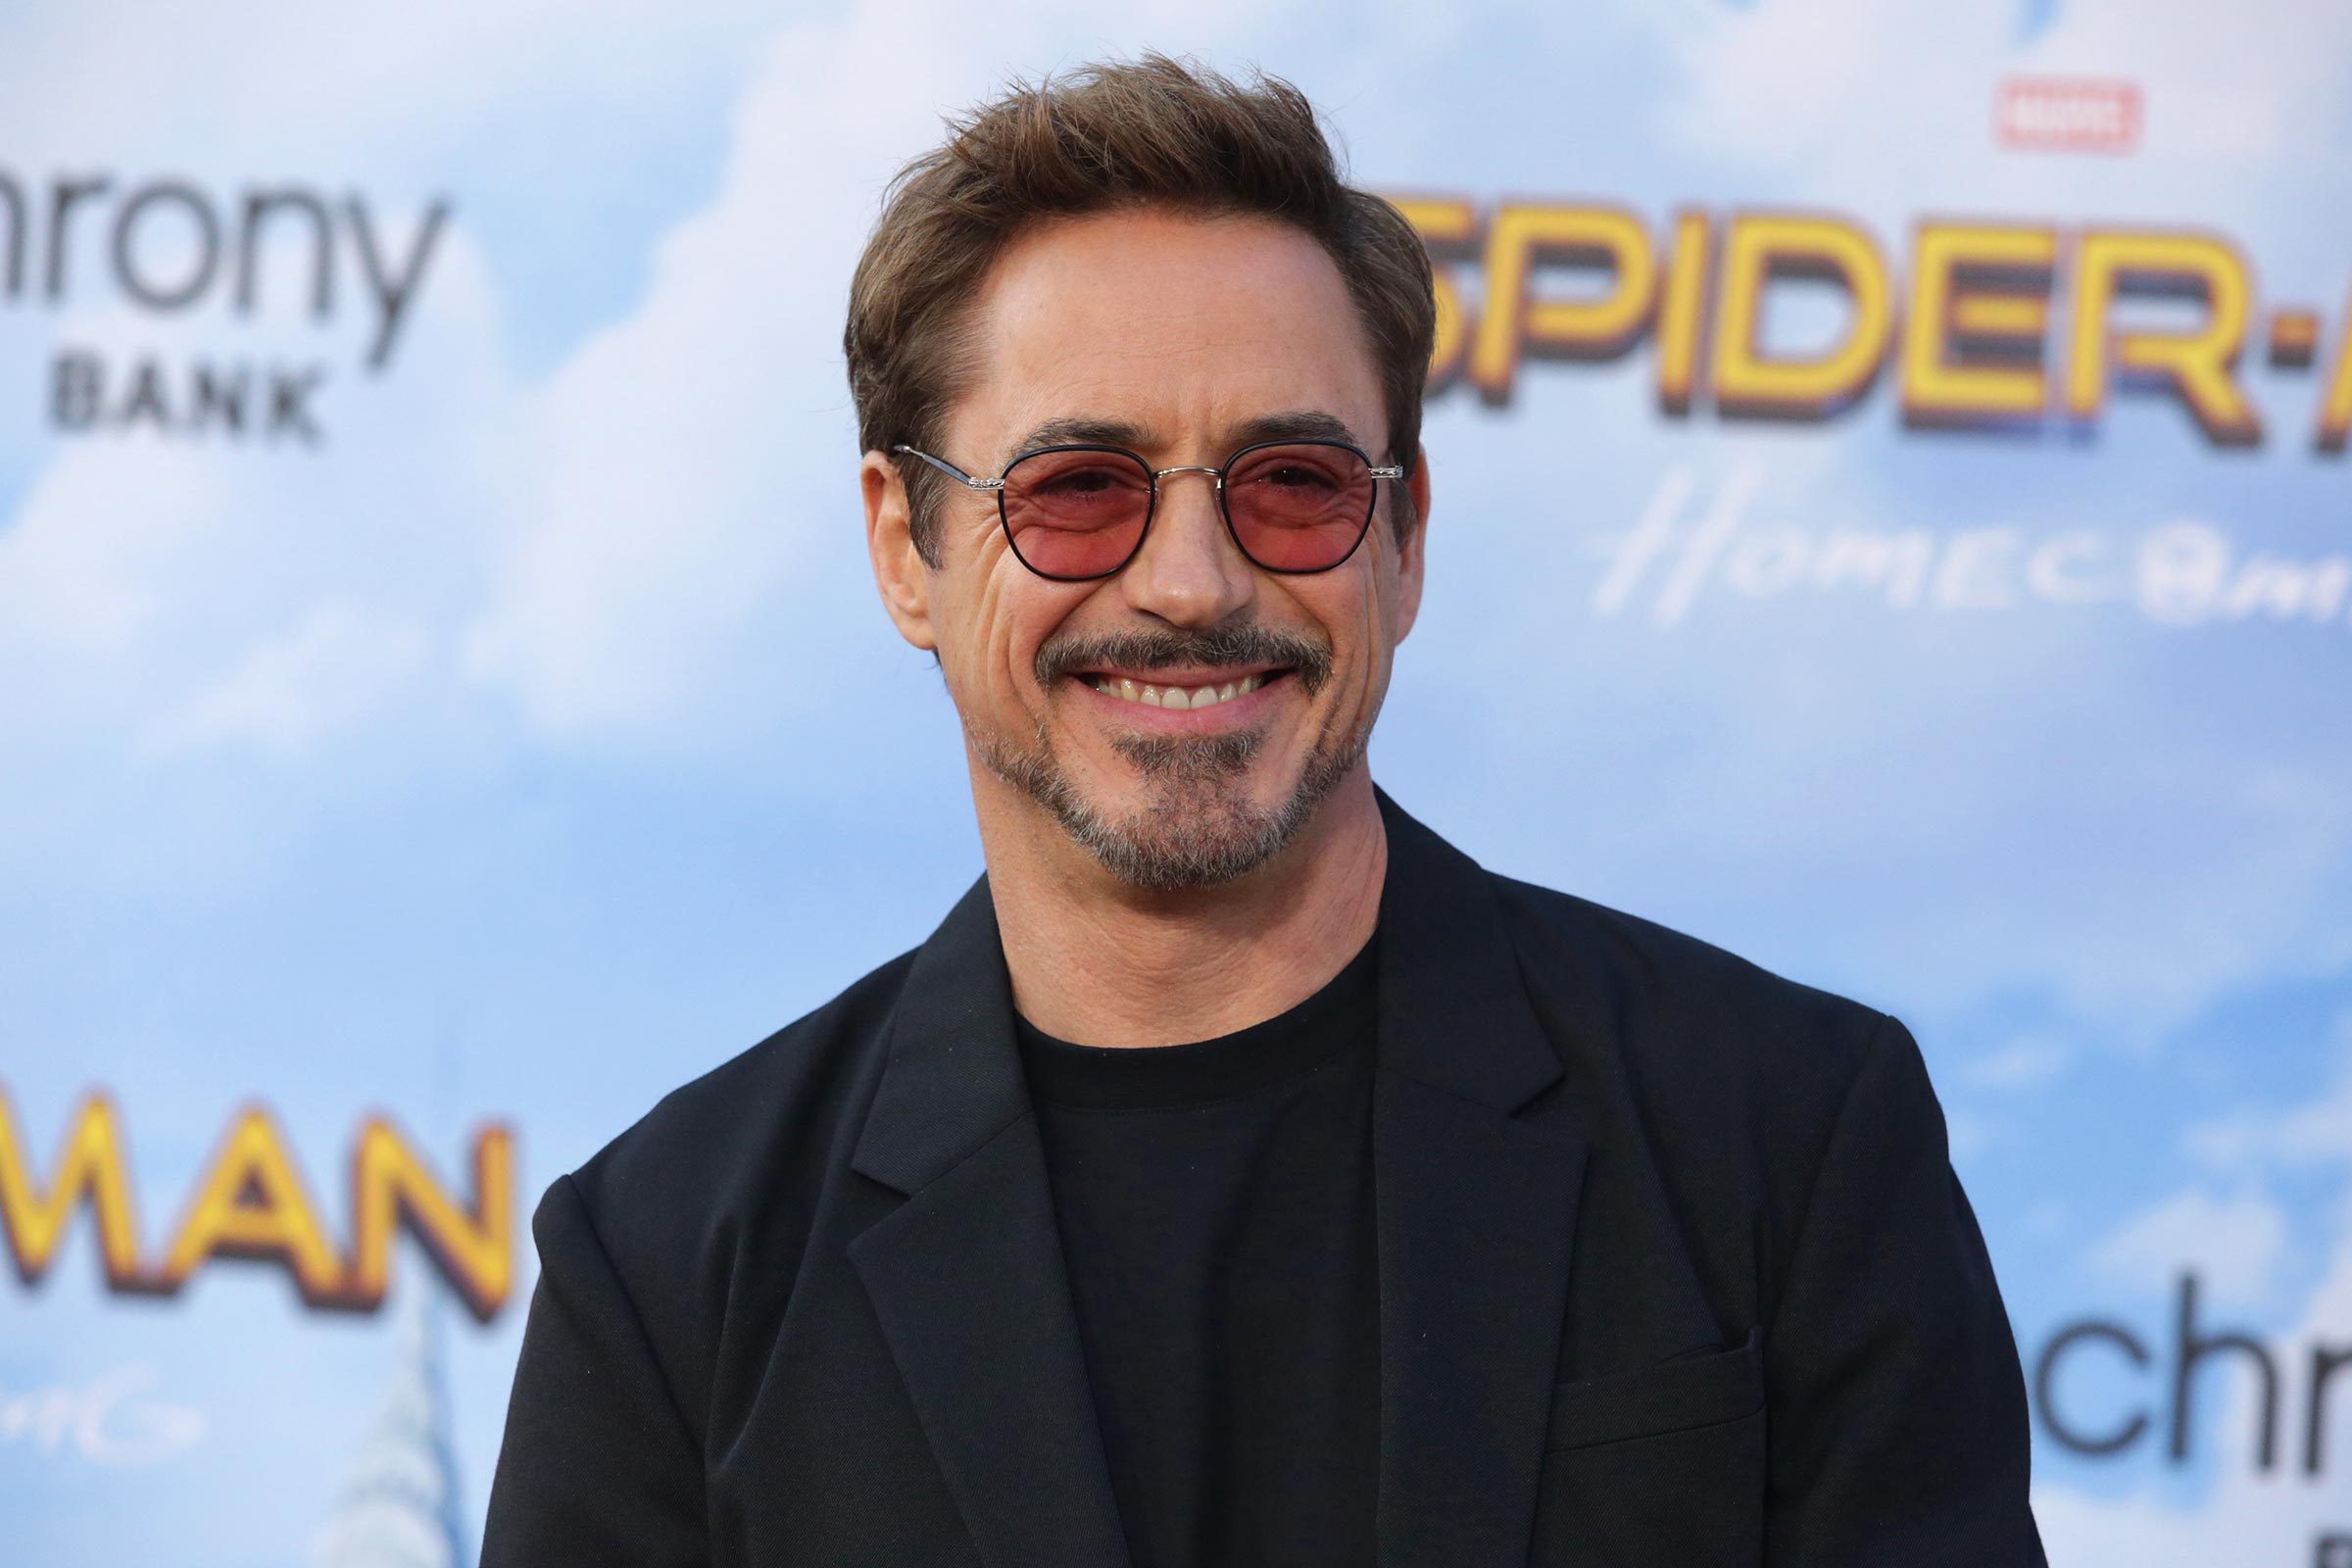 Robert Downey Jr. Fun Facts: 15 things you might not know about